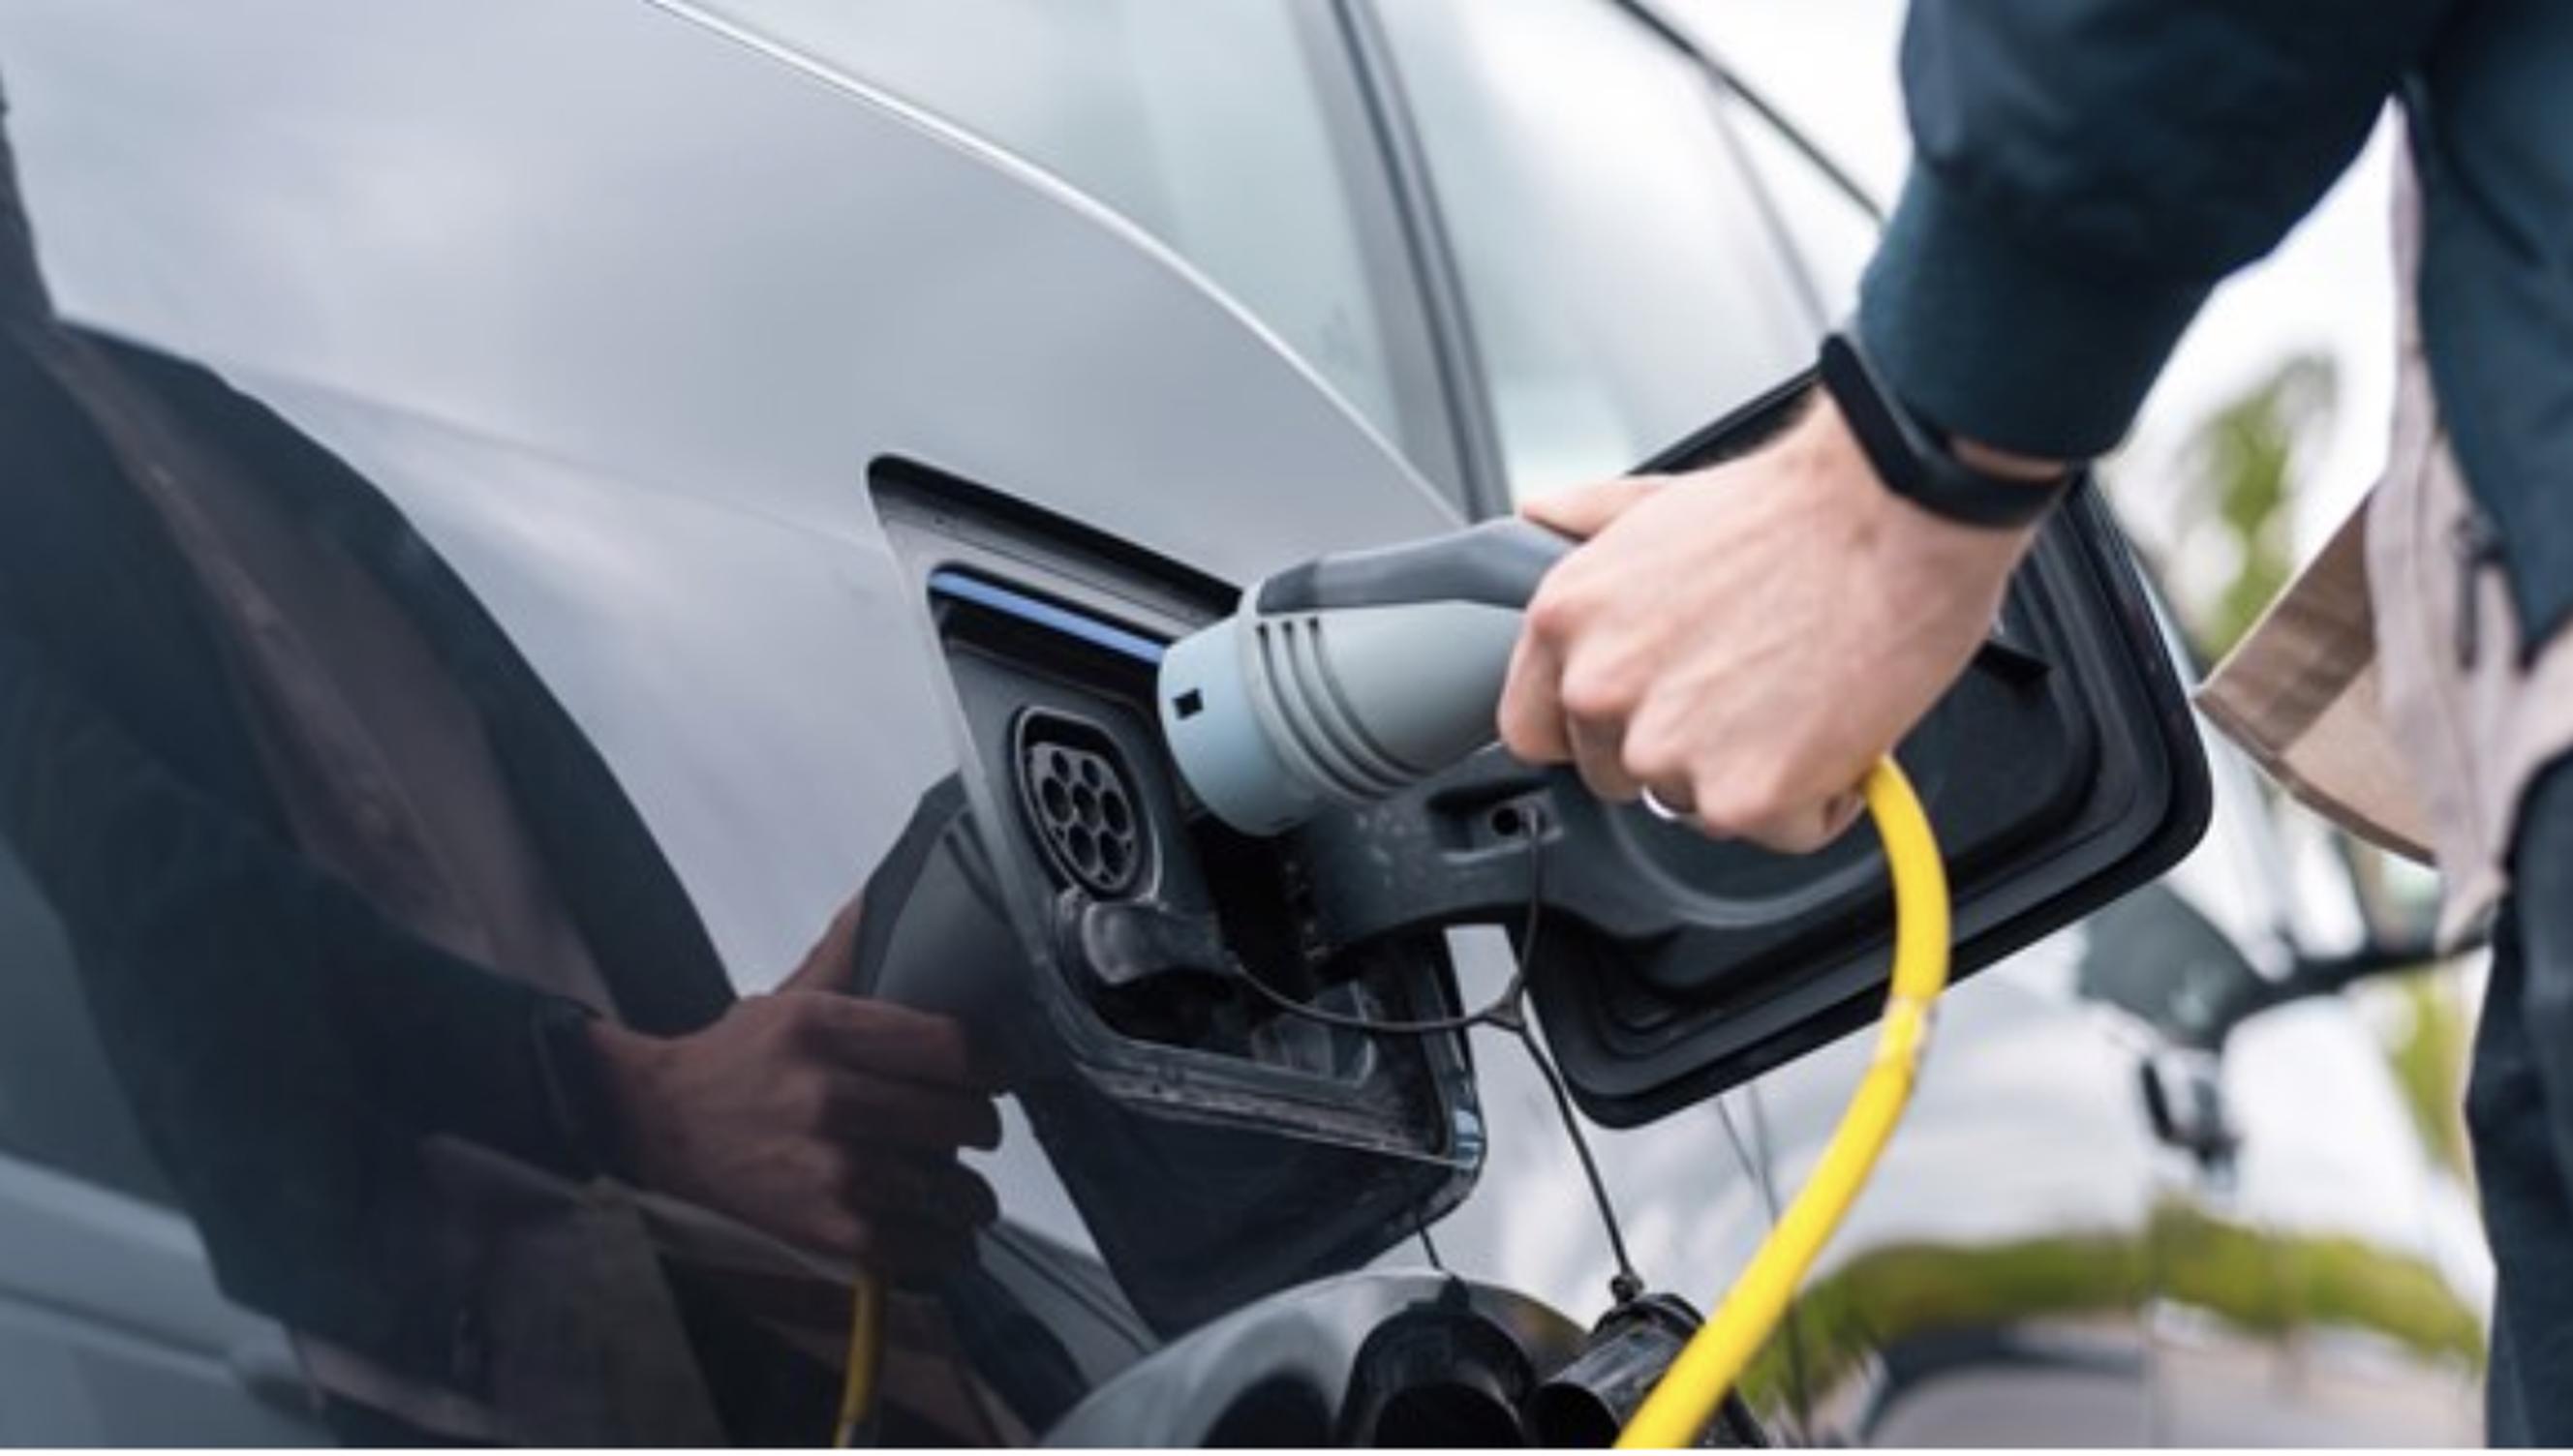 Research suggests that charge point installation will create 4,575 jobs in the Midlands